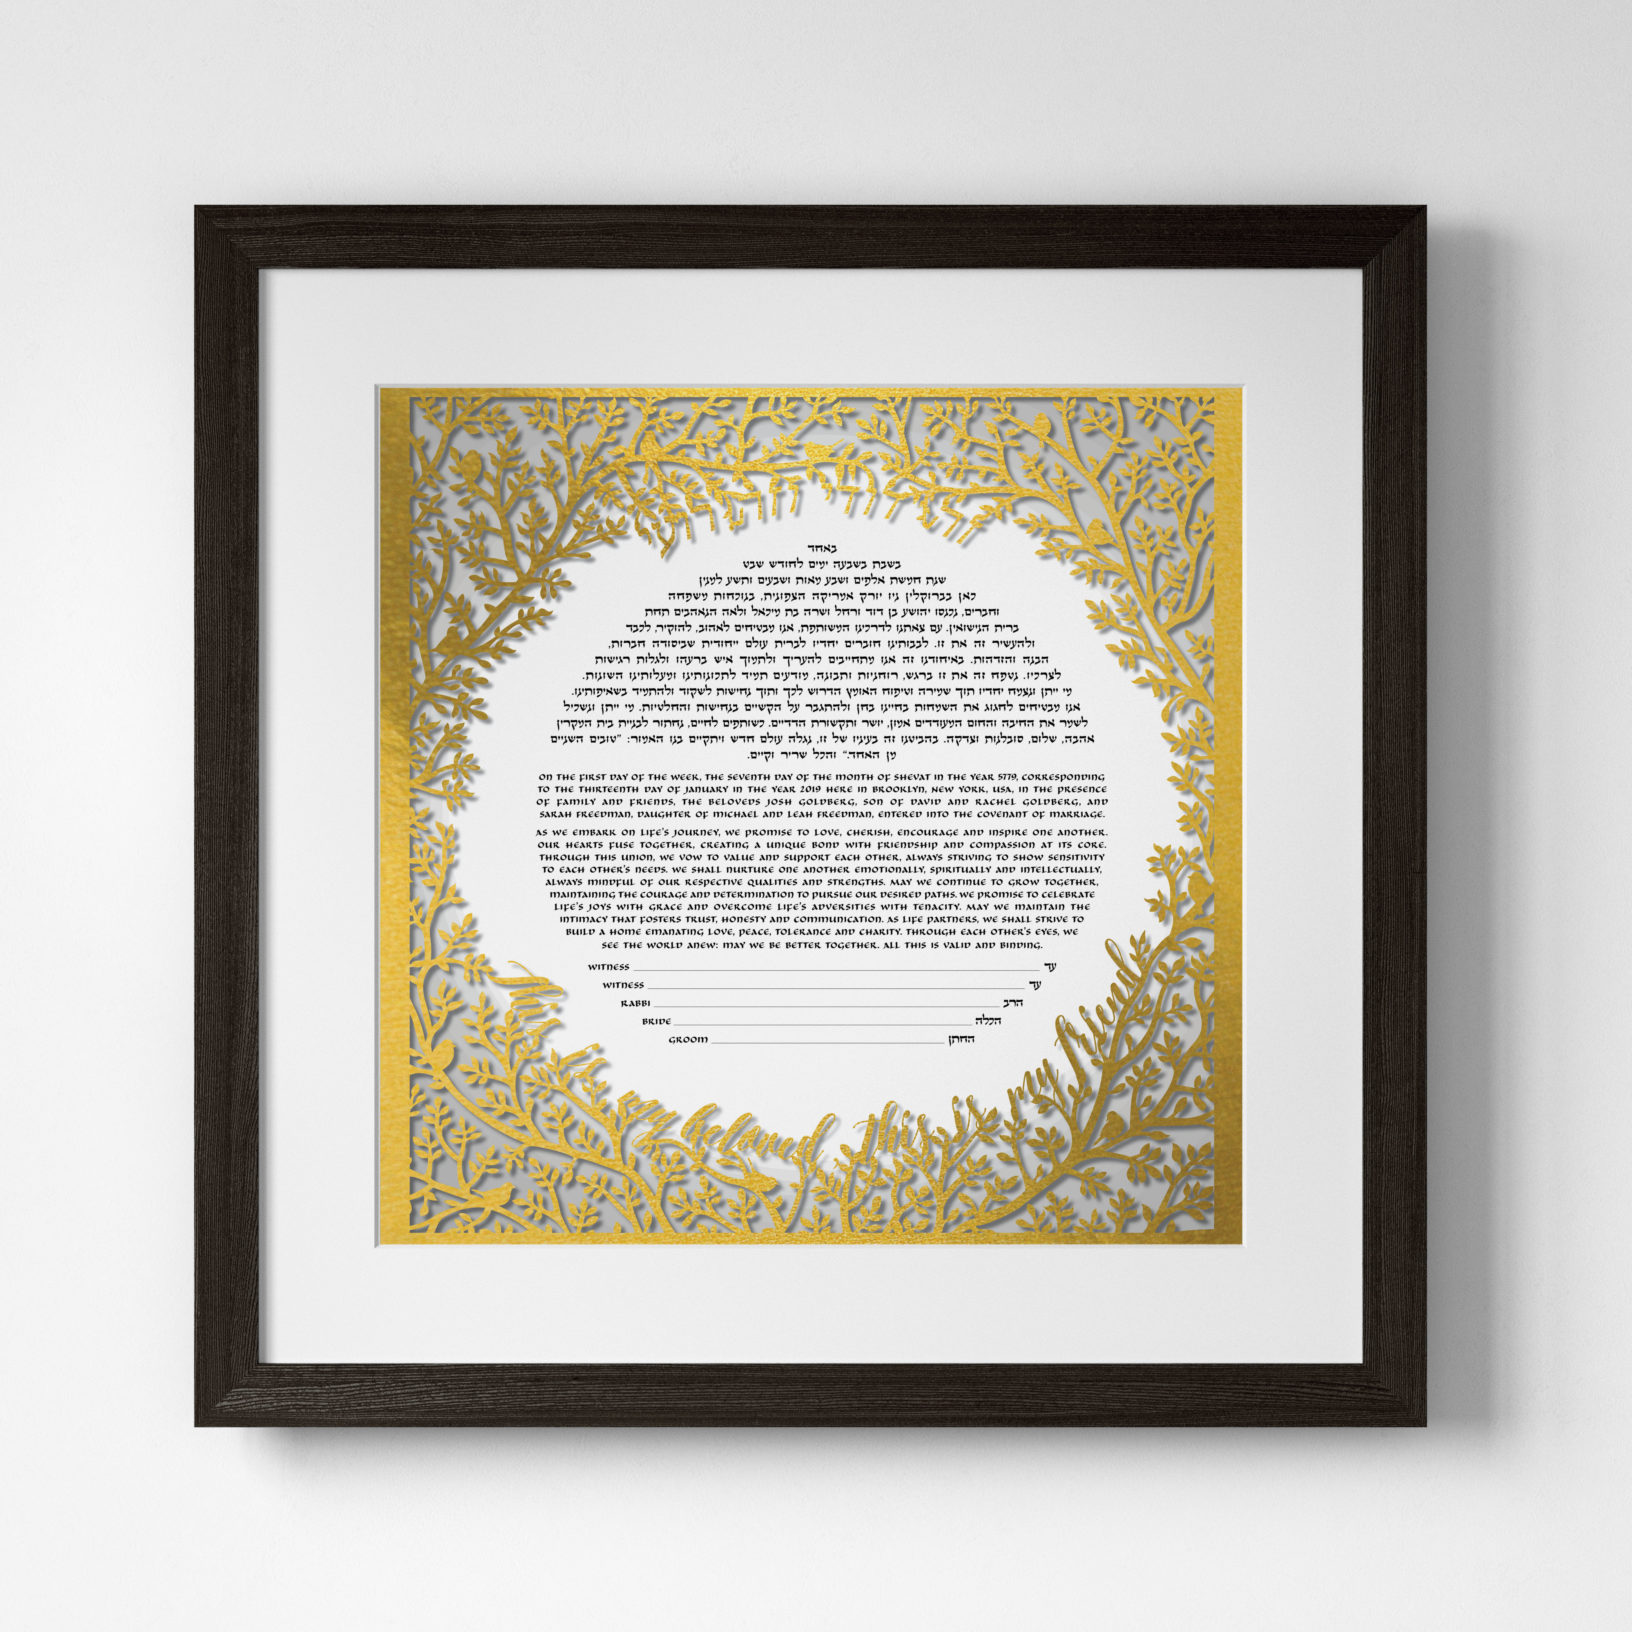 Lauren Rosenthal McManus Papercut Beloveds I Papercut Gold on Grayscale Fade Ketubah Marriage Contracts